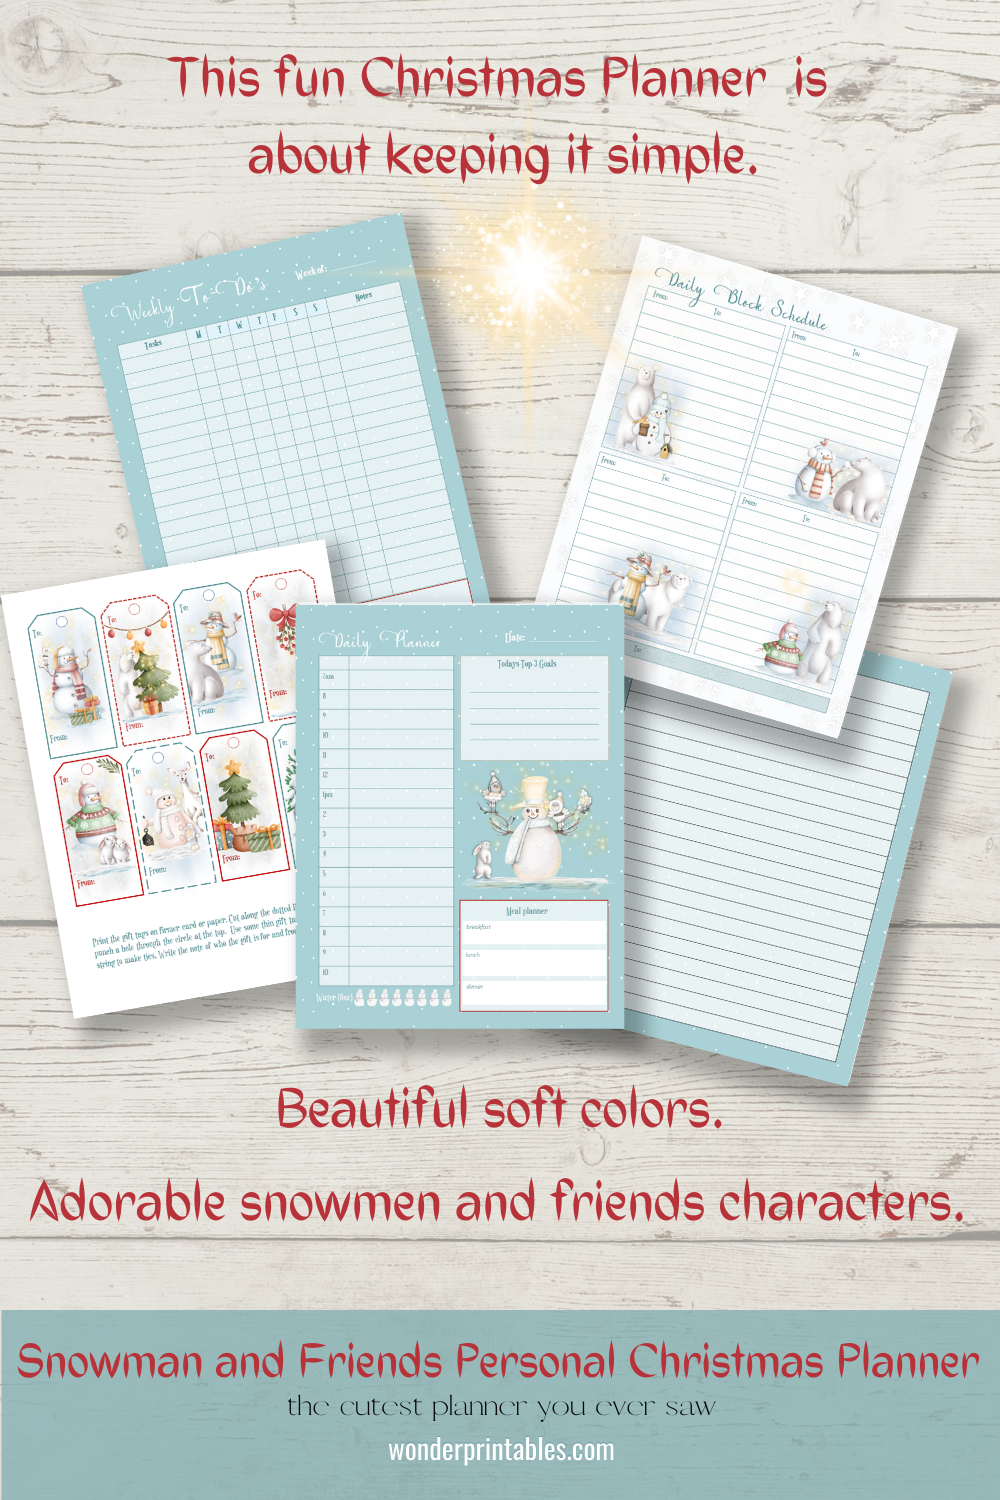 Snowmen and Friends Personal Christmas Planner